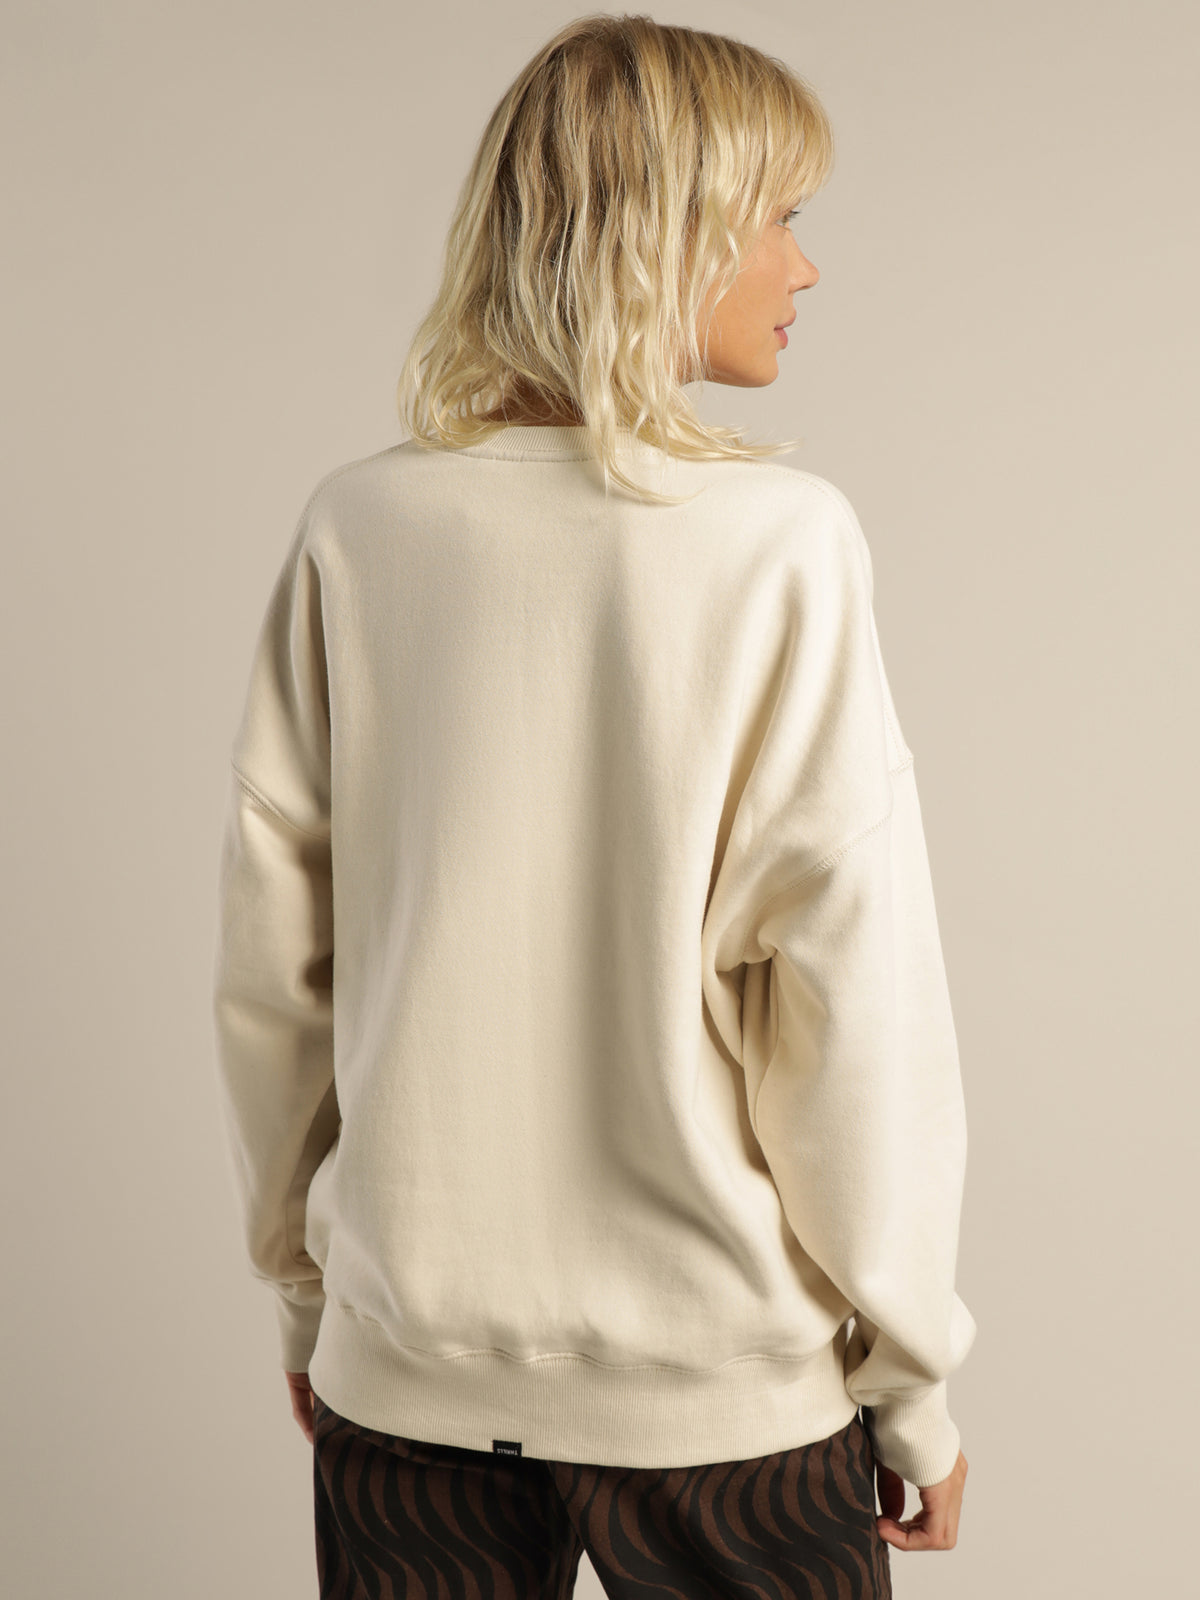 Paradise Crest Slouch Crew in Unbleached